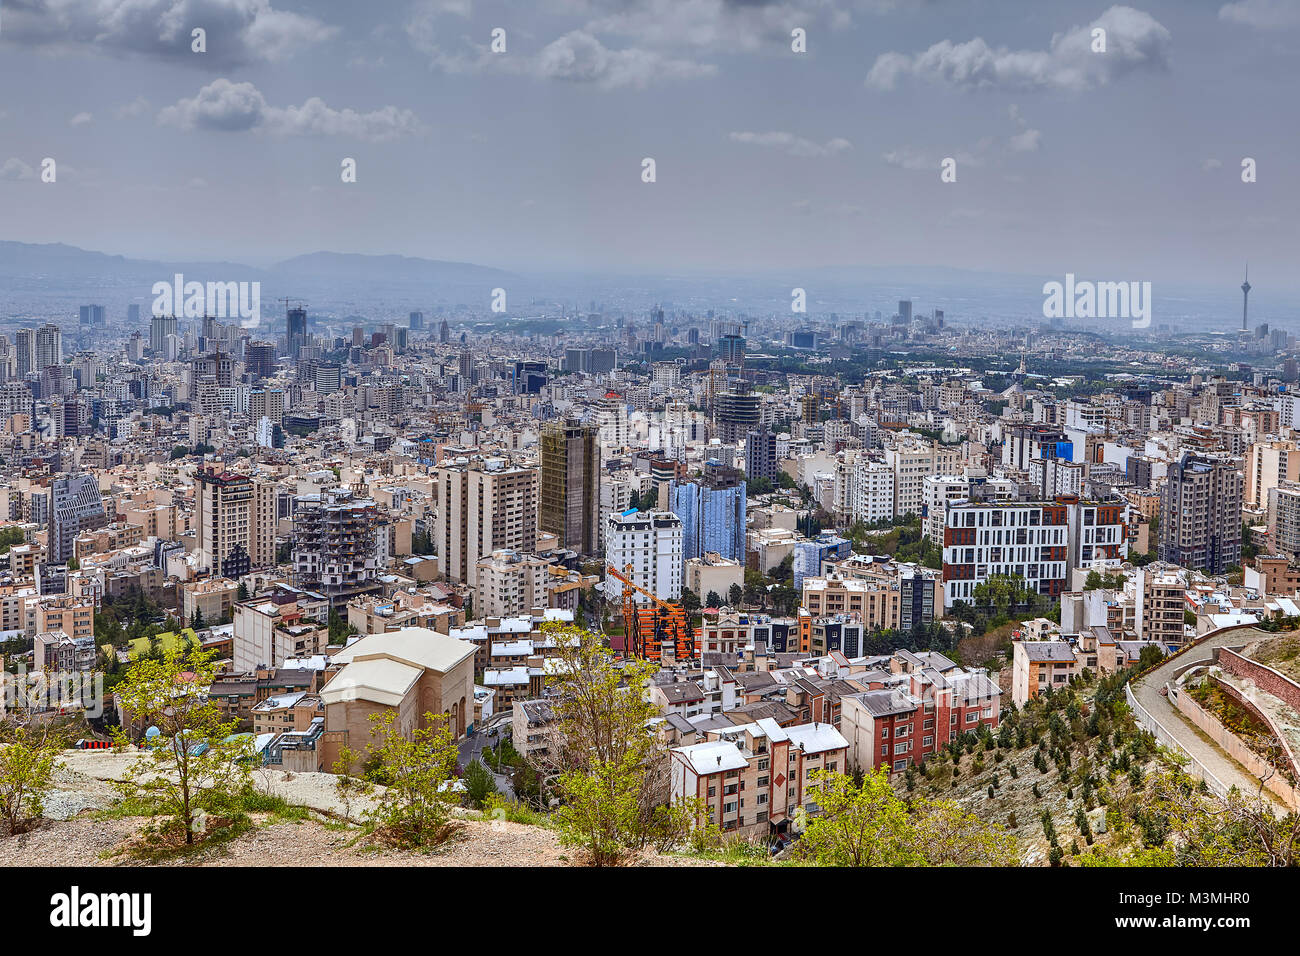 Tehran, Iran - April 28, 2017: Skyline view on capital city of Iran with  high-rise buildings, and public parks Stock Photo - Alamy